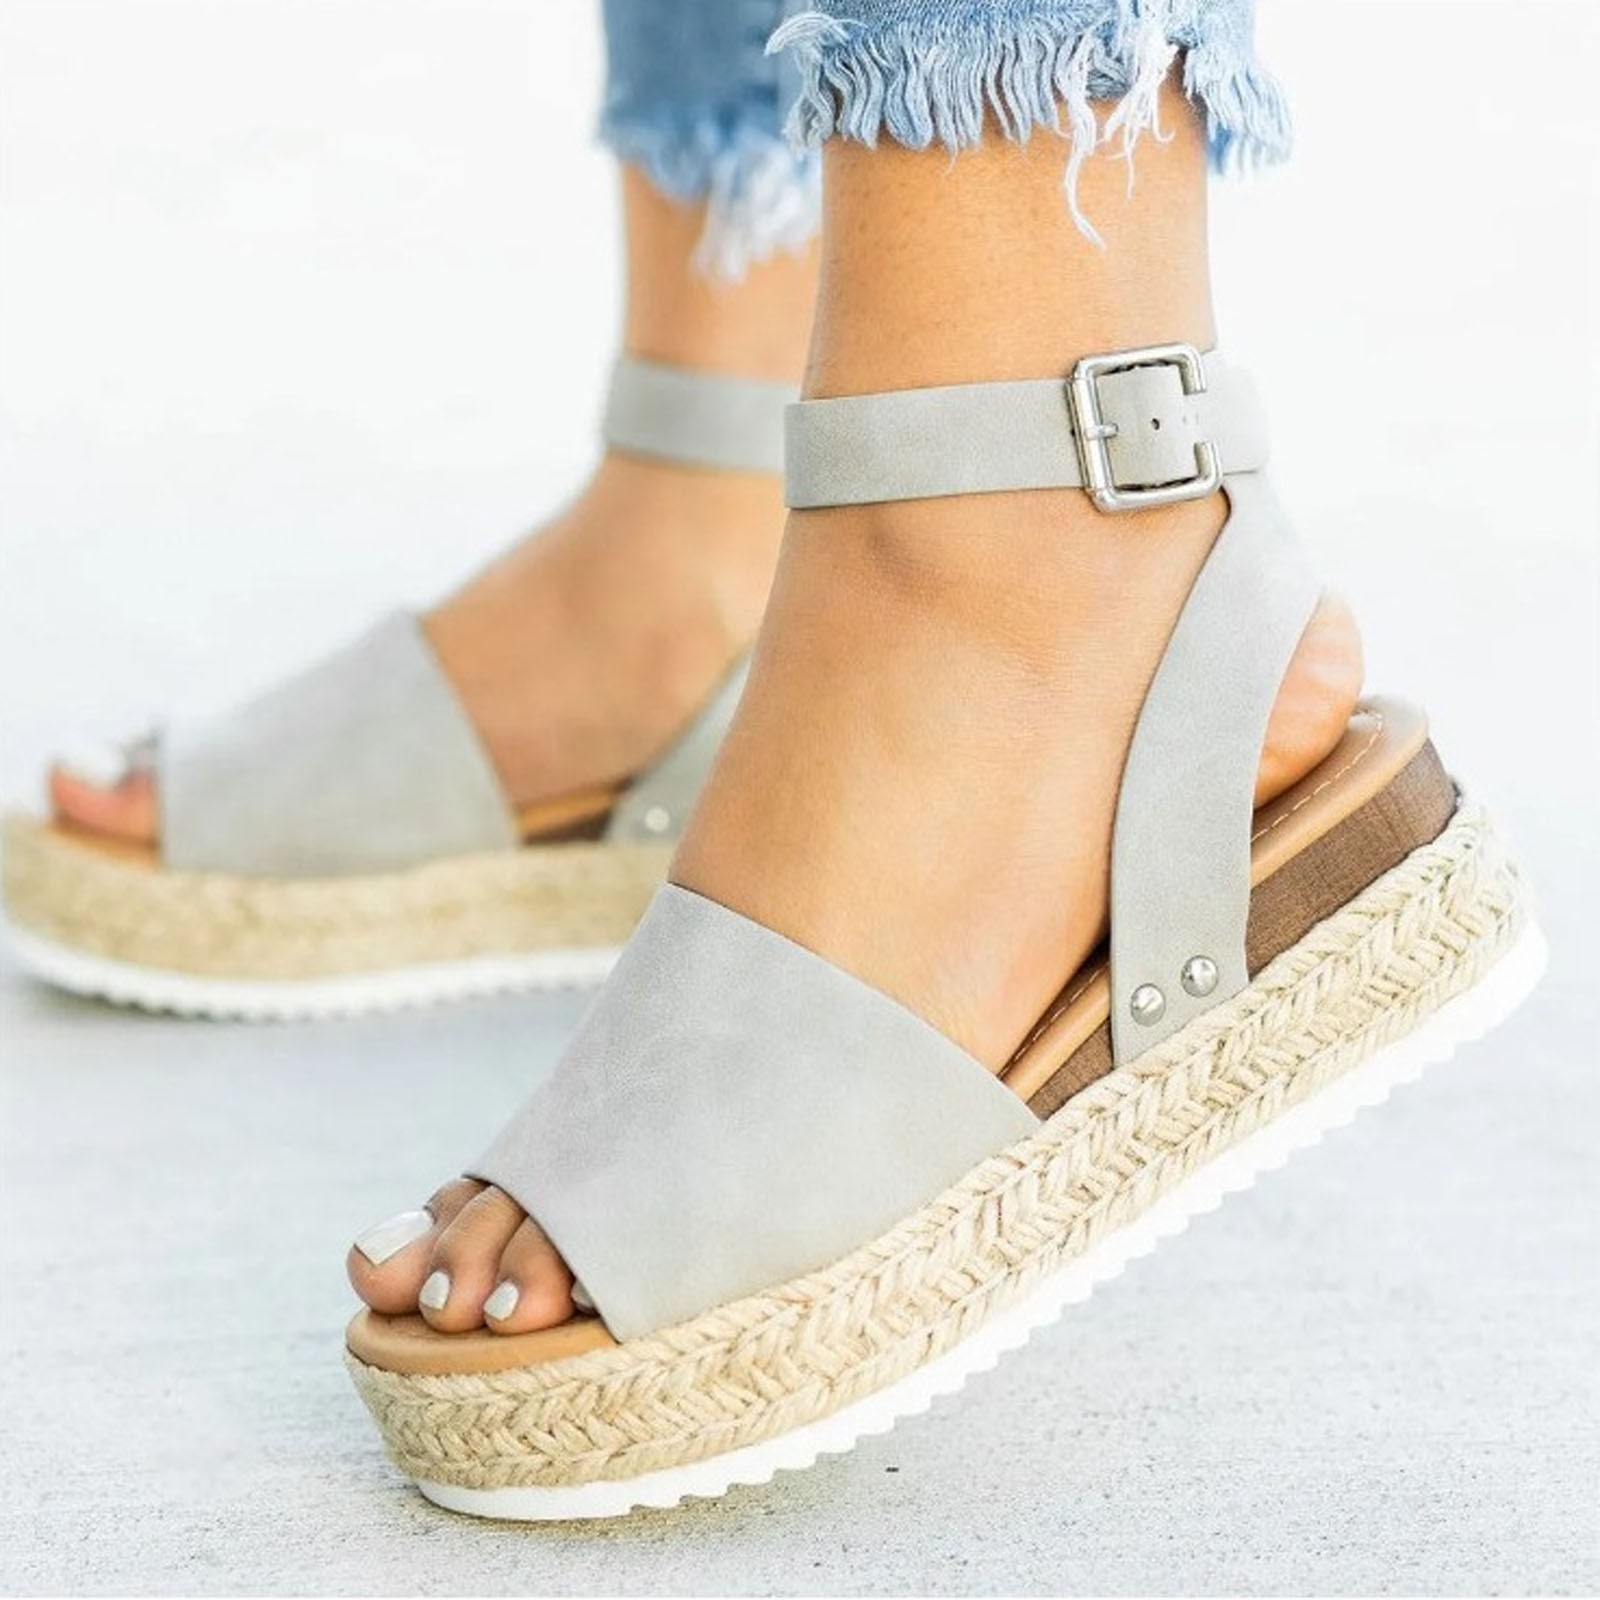 Azrian Woman Summer Sandals Open toe Casual Platform Wedge Shoes Casual Canvas Shoes - image 1 of 6